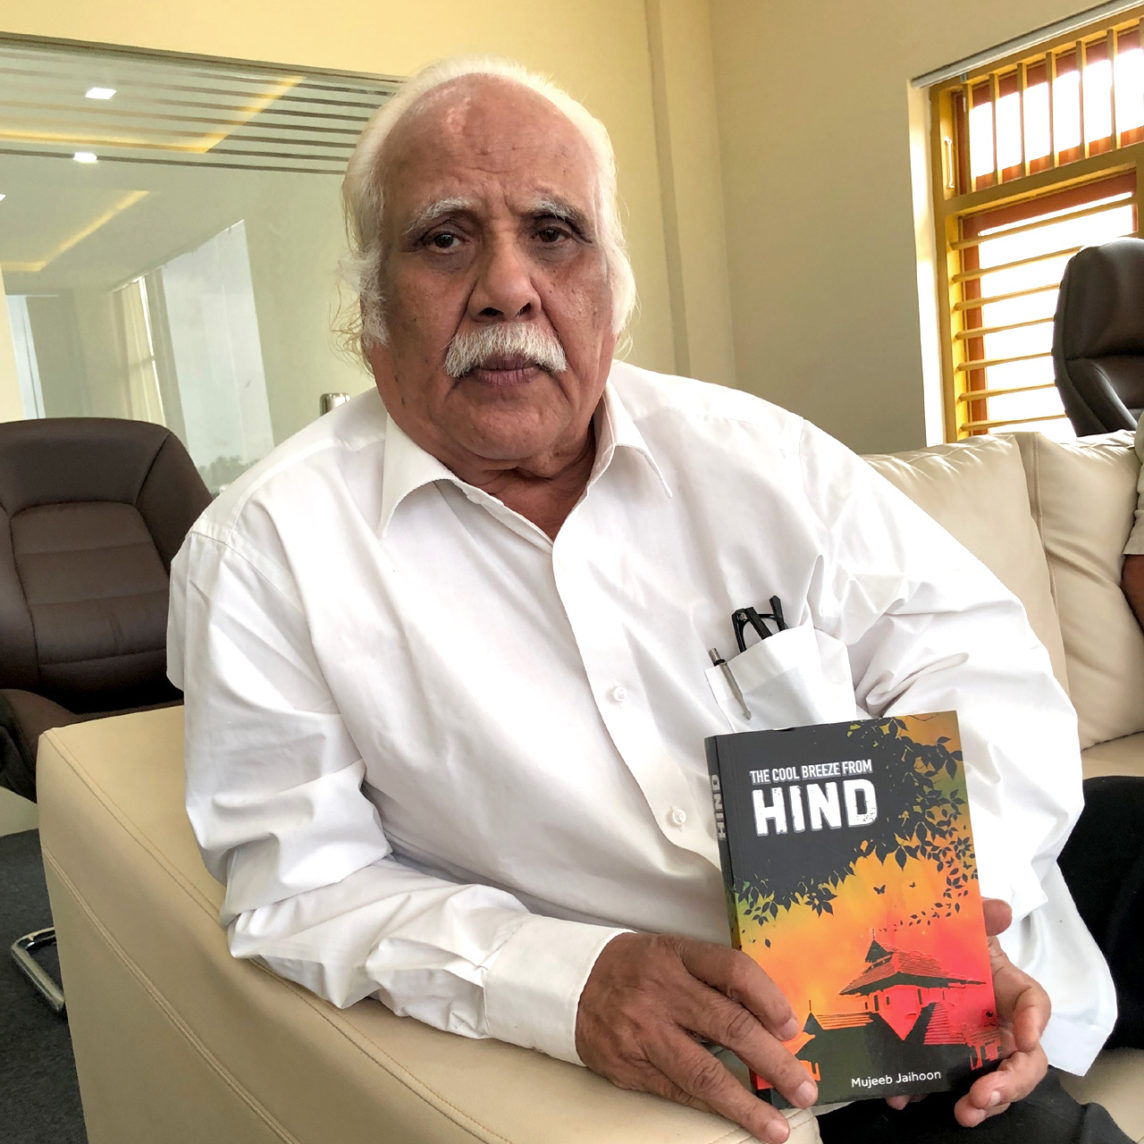 KKN Kurup holding The Cool Breeze From Hind, historical fiction by Mujeeb Jaihoon